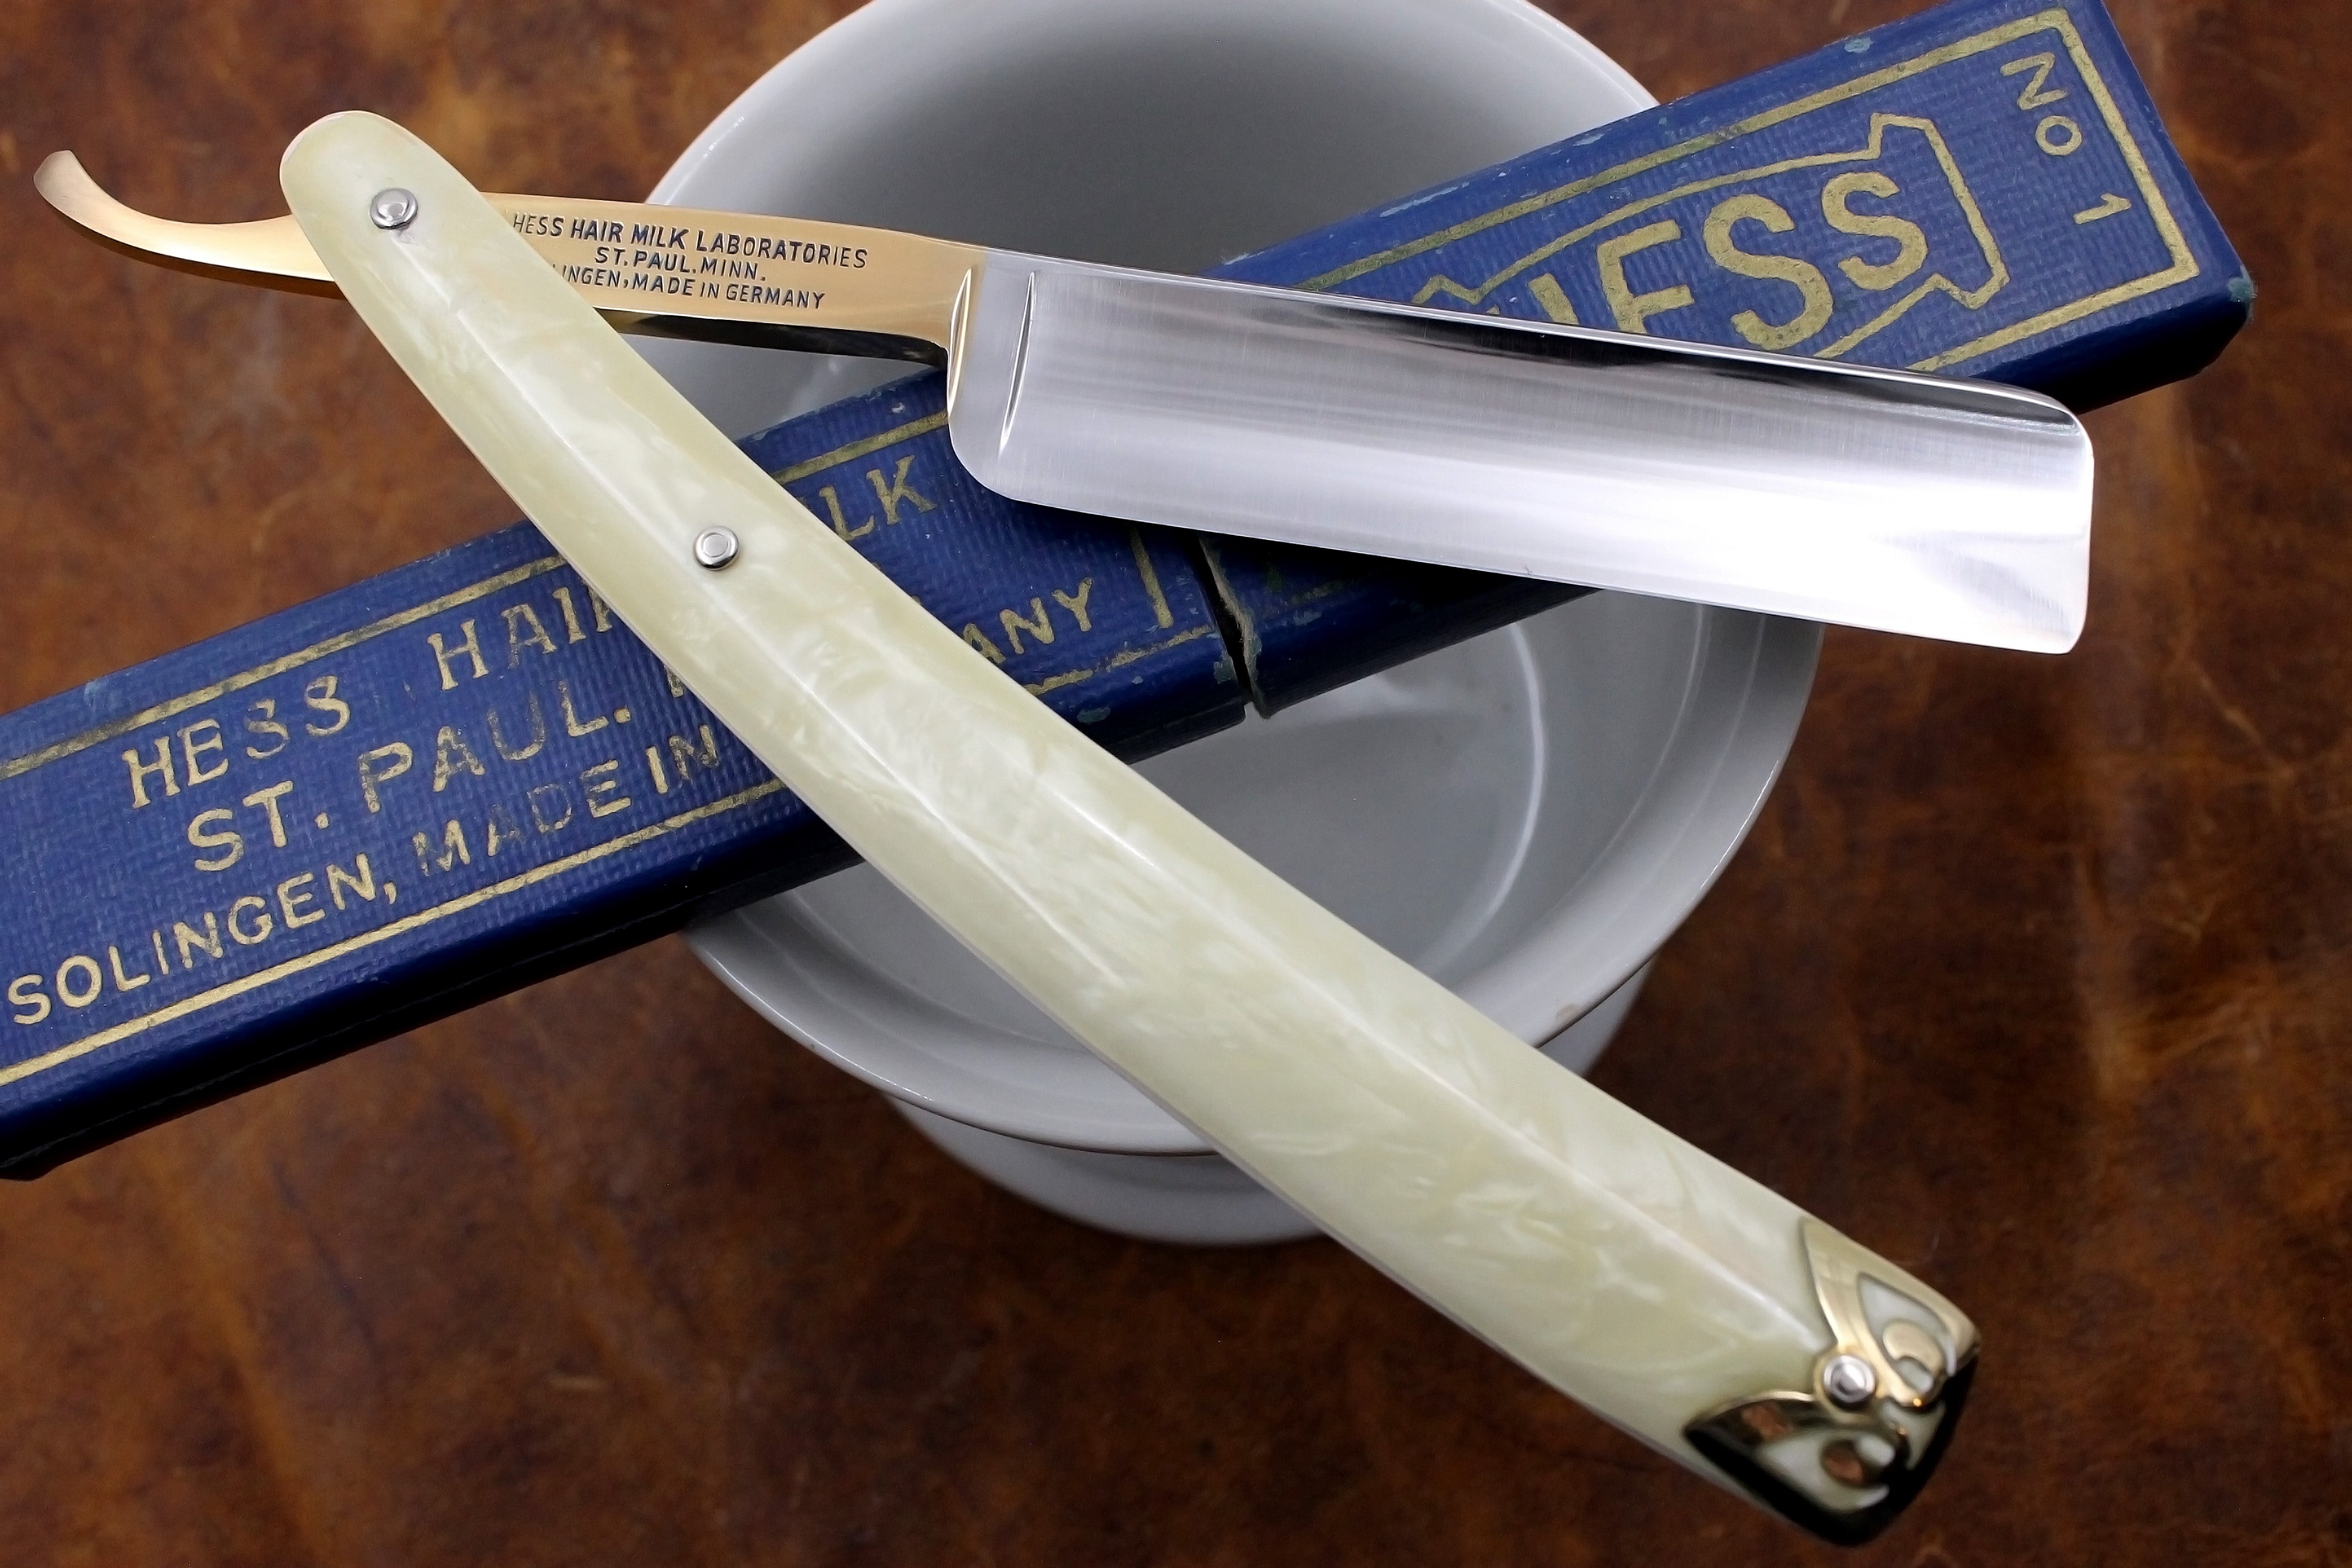 Hess Hair Milk Labs No.1 11/16 Blade Cracked Ice Scales - Fully Restored Vintage Solingen Straight Razor - Shave Ready